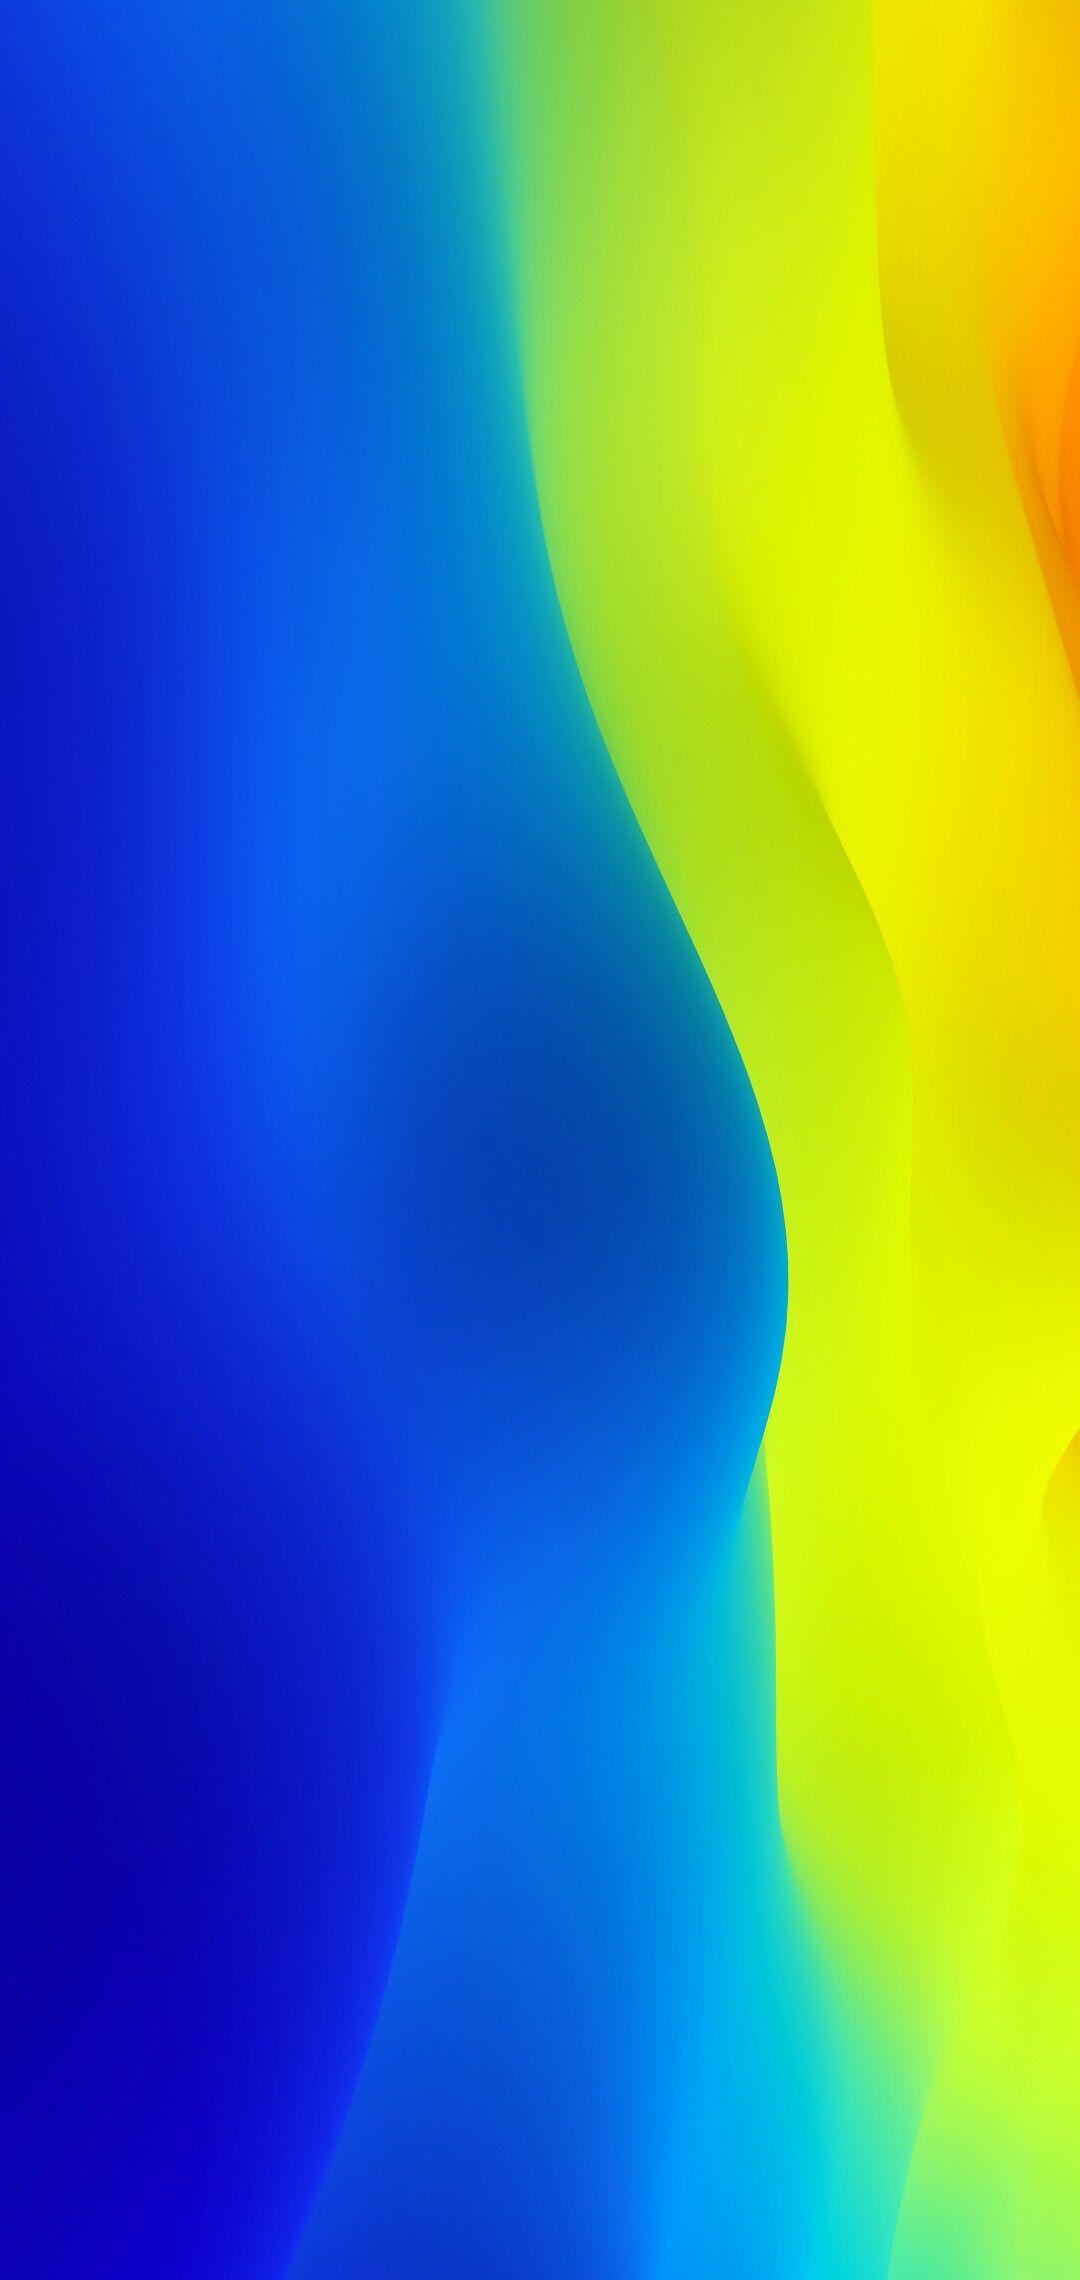 iPhone Wallpaper. Blue, Green, Yellow, Light, Colorfulness